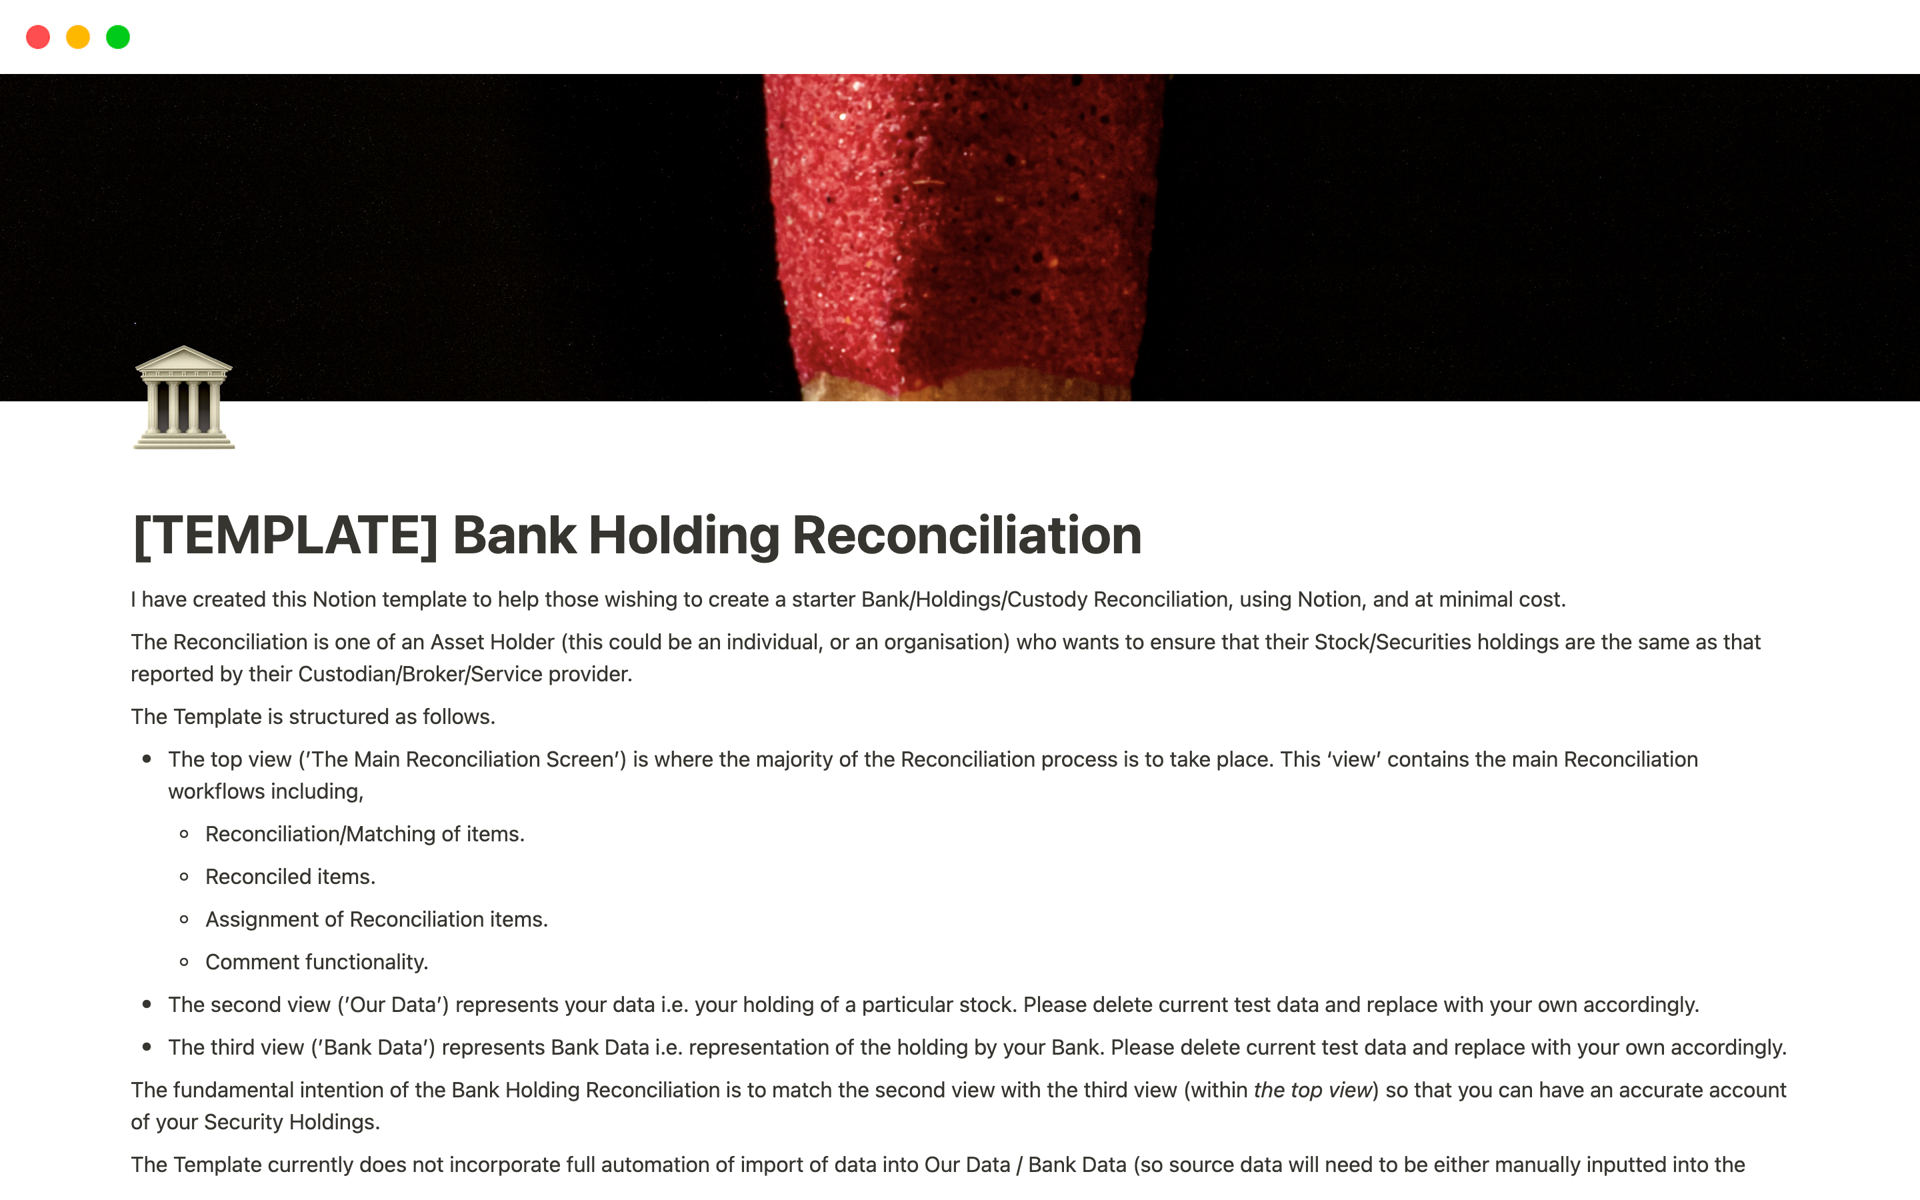 The Template offers an out of the box Bank Security Holdings Reconciliation solution, using Notion, at minimal cost. 